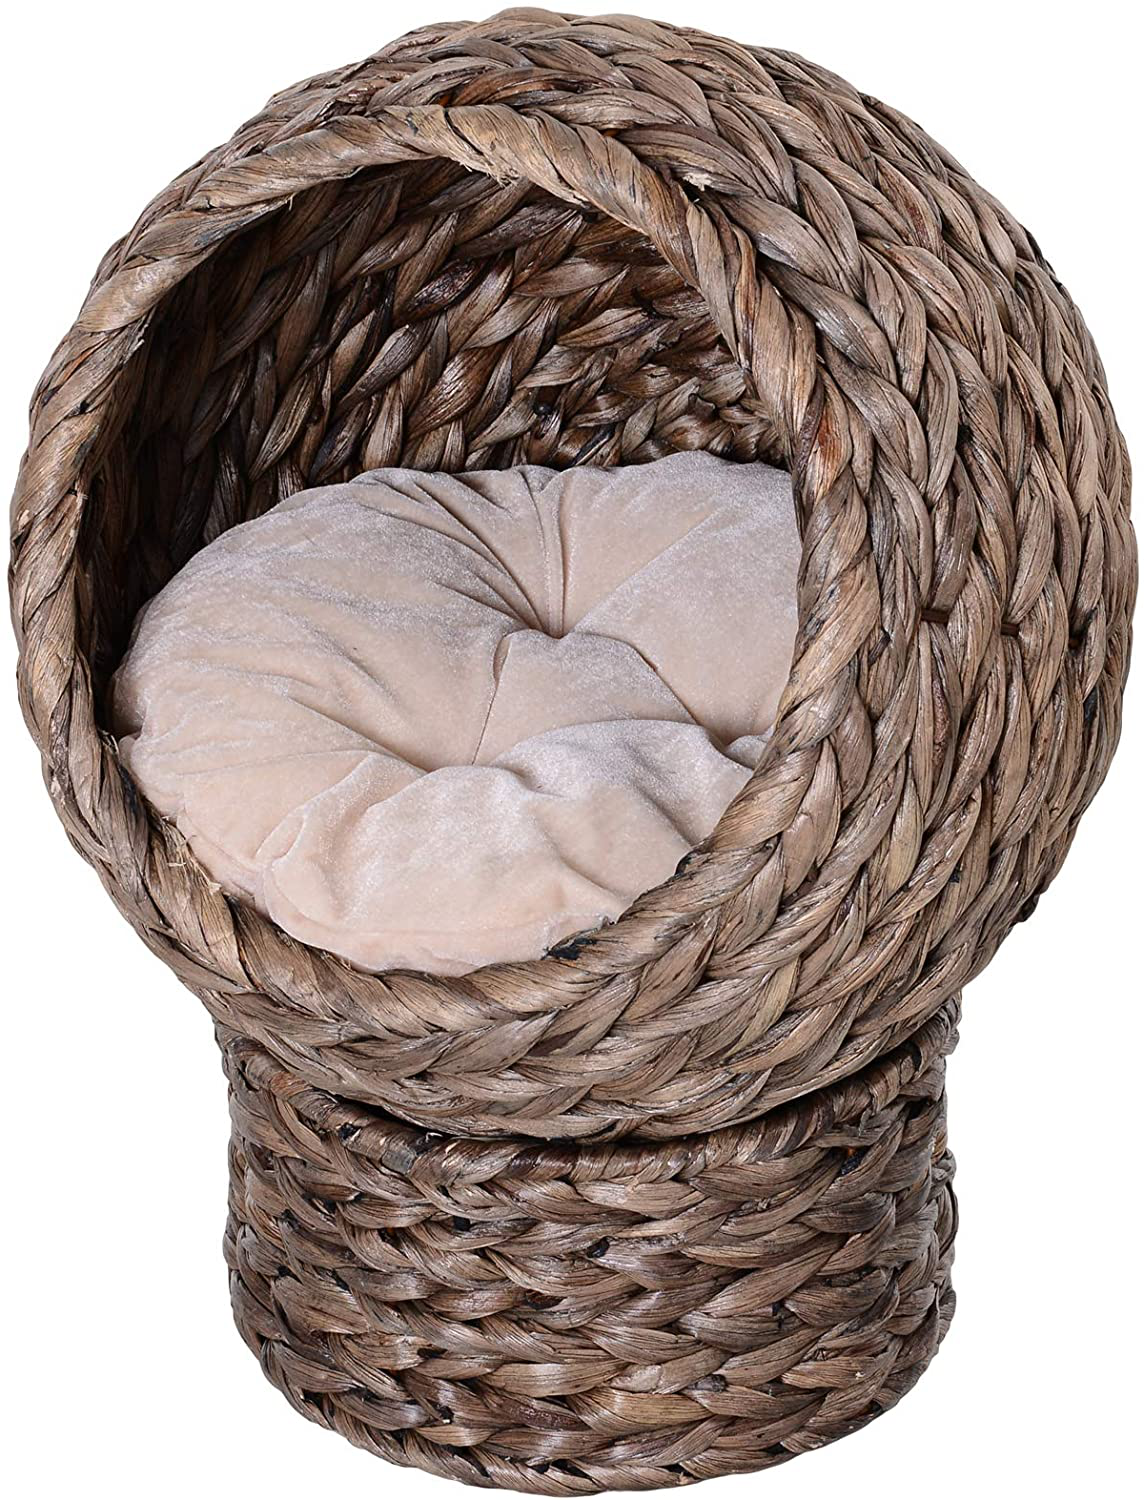 Pawhut 20" Natural Braided Banana Leaf Elevated Cat Bed Basket with Cushion